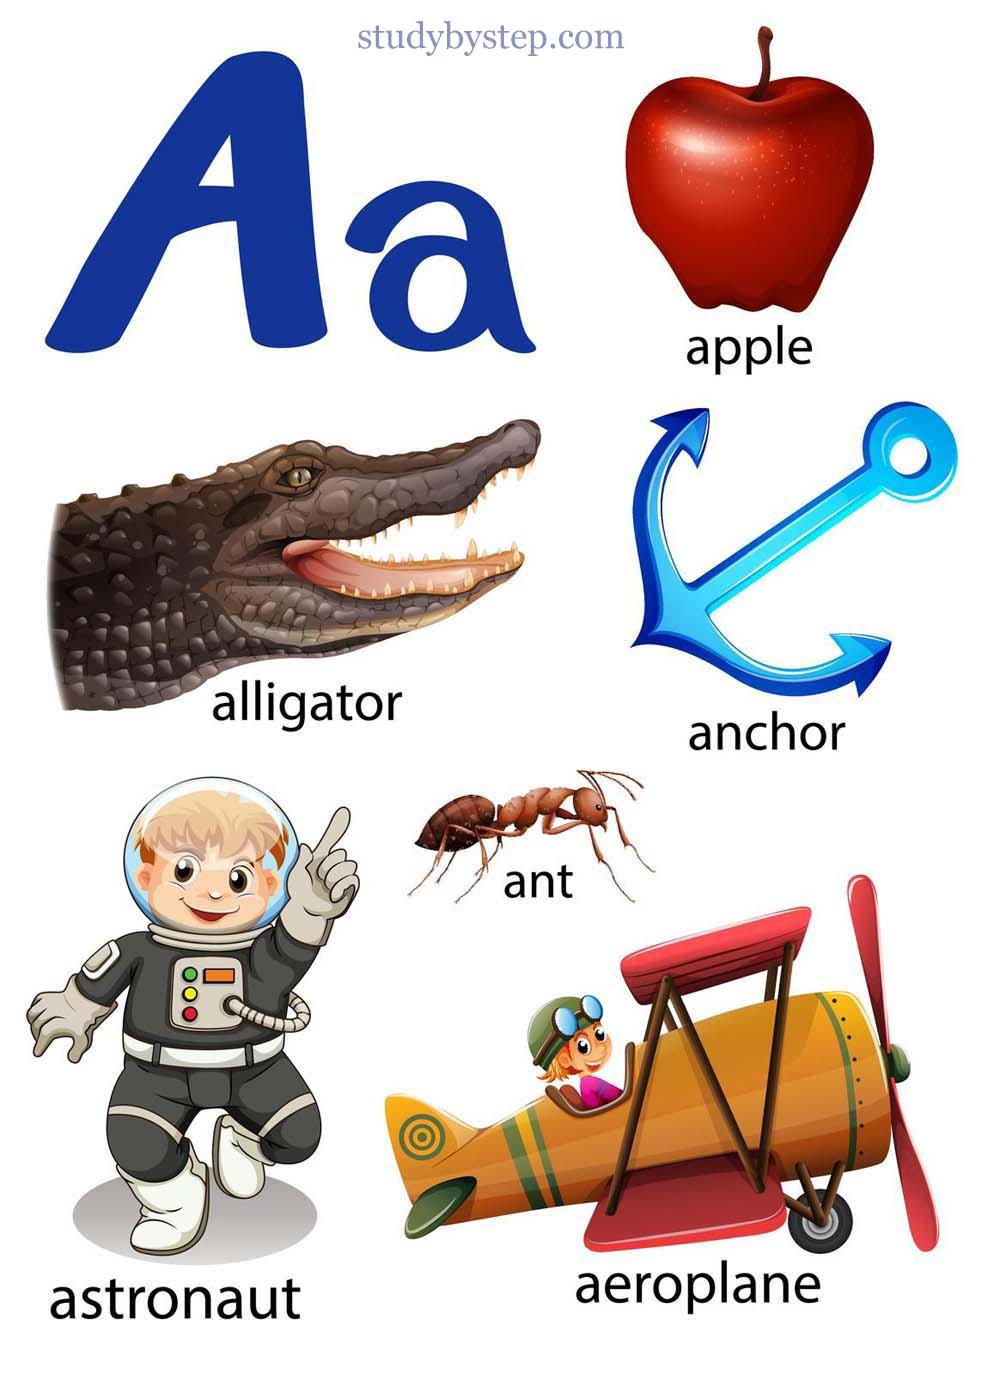 Pictures of Items starting with A - apple, alligator, anchor, ant, astronaut,aeroplane